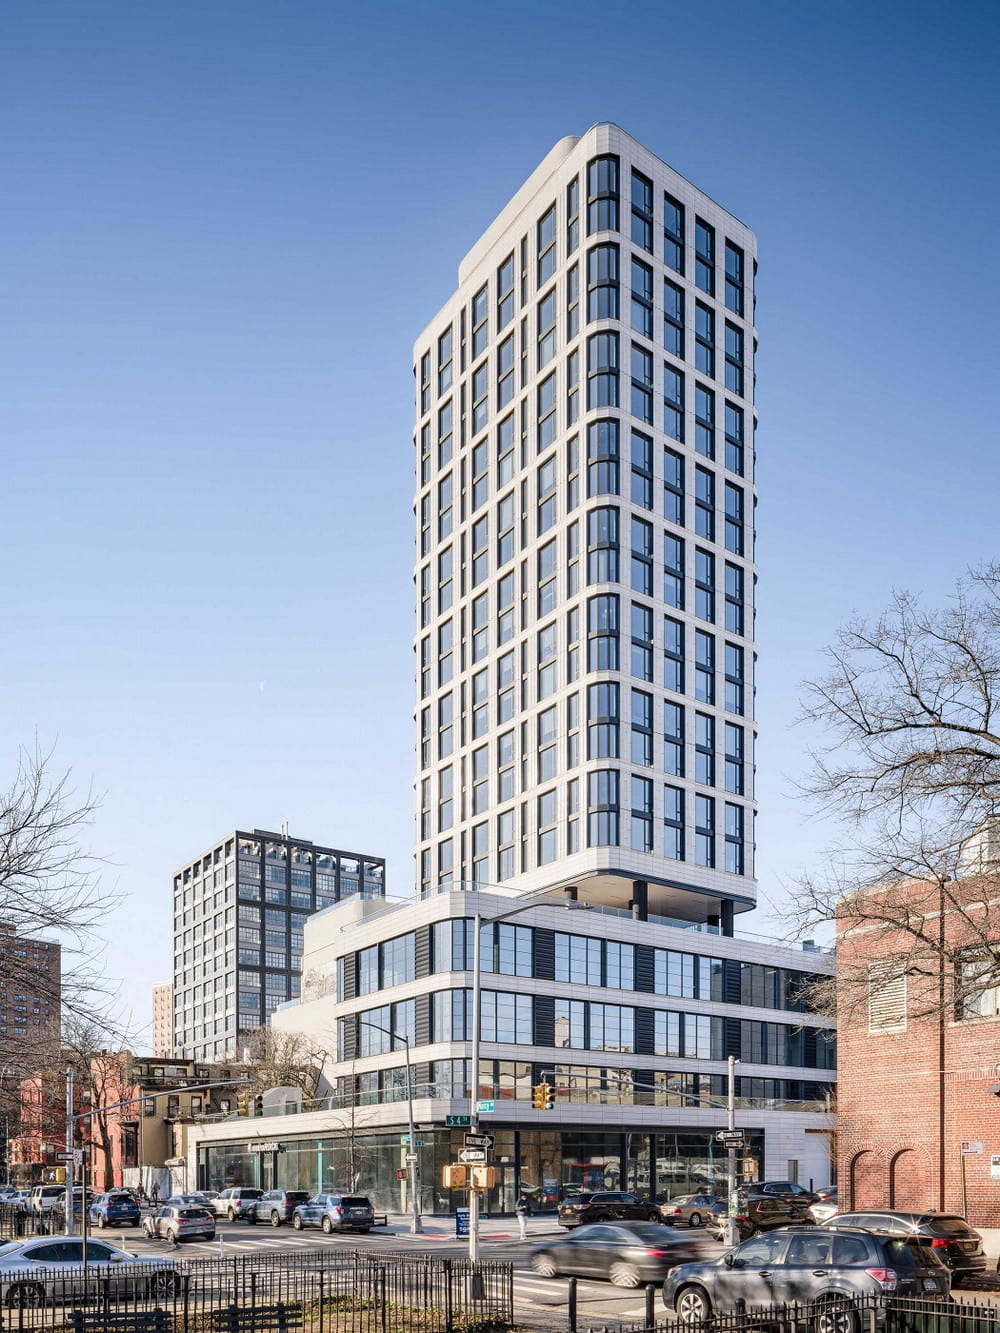 The Dime - A Contemporary Mixed-Use Tower by Fogarty Finger